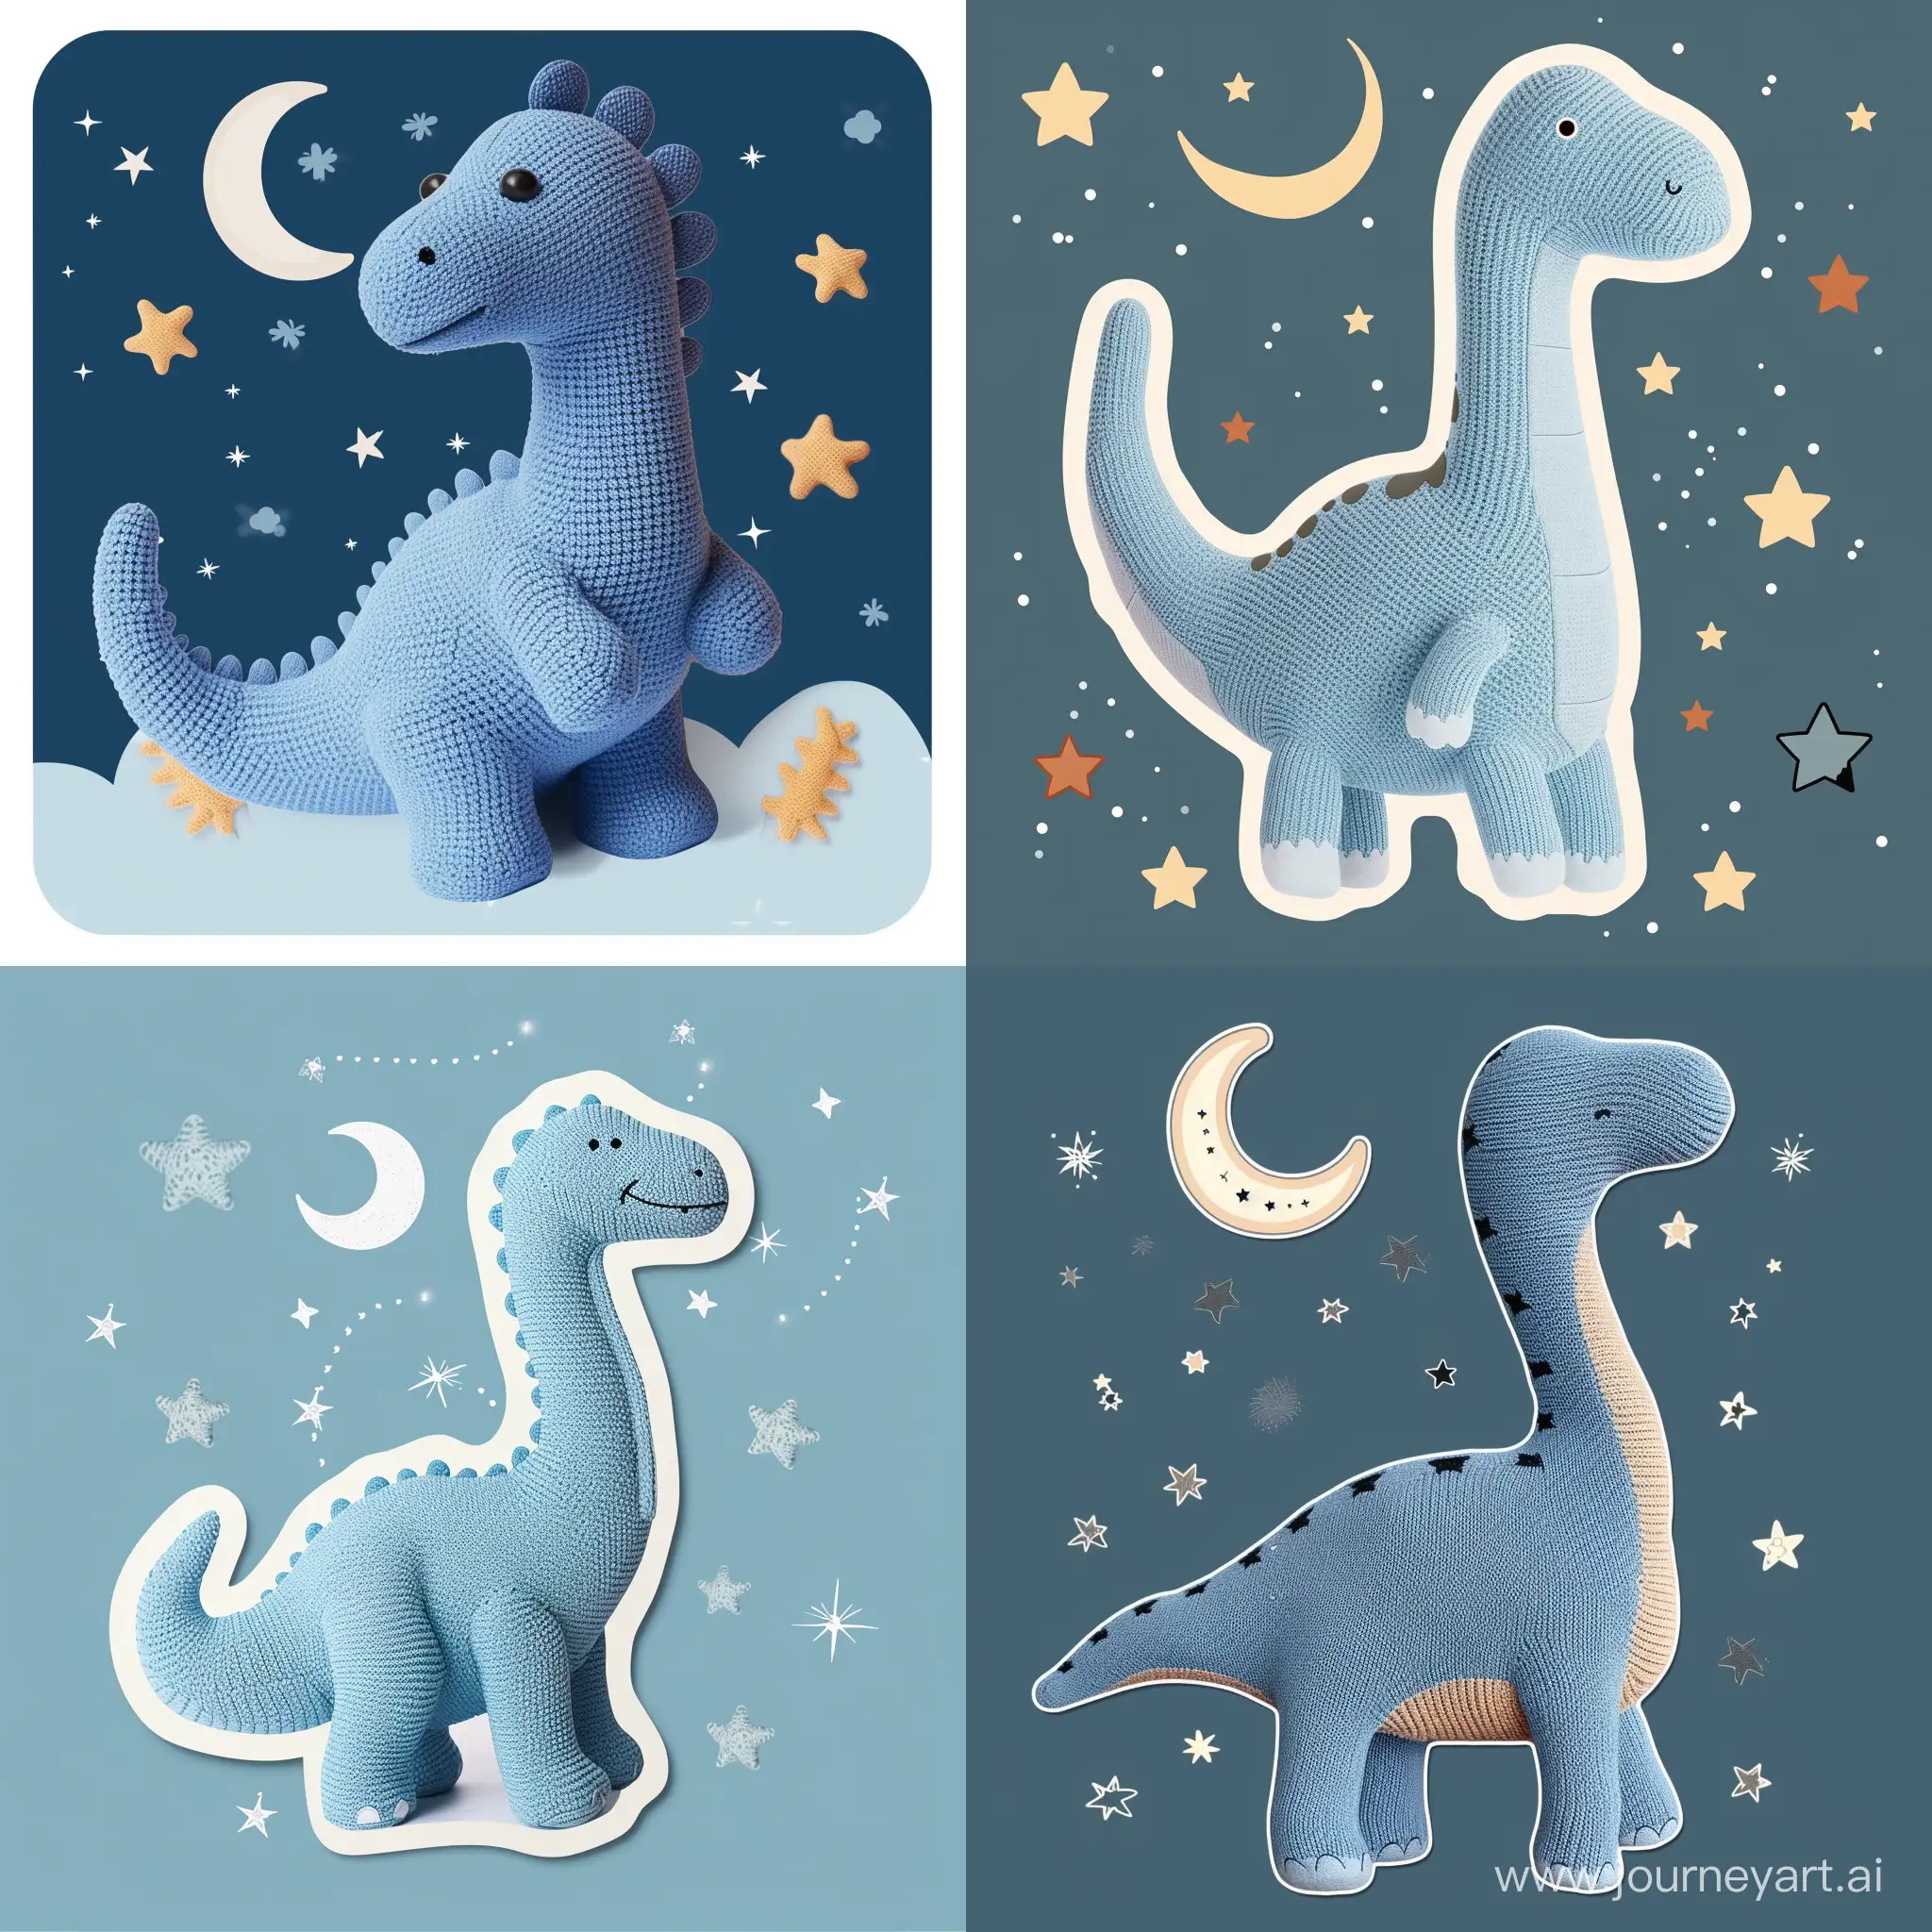 make a picture of a sticker for a packaging for a soft cotton knitted toy - blue dinosaur. Try to promote that this toy is an ideal companion for cuddling and sleeping. So we want to display stars and a crescent moon on the sticker